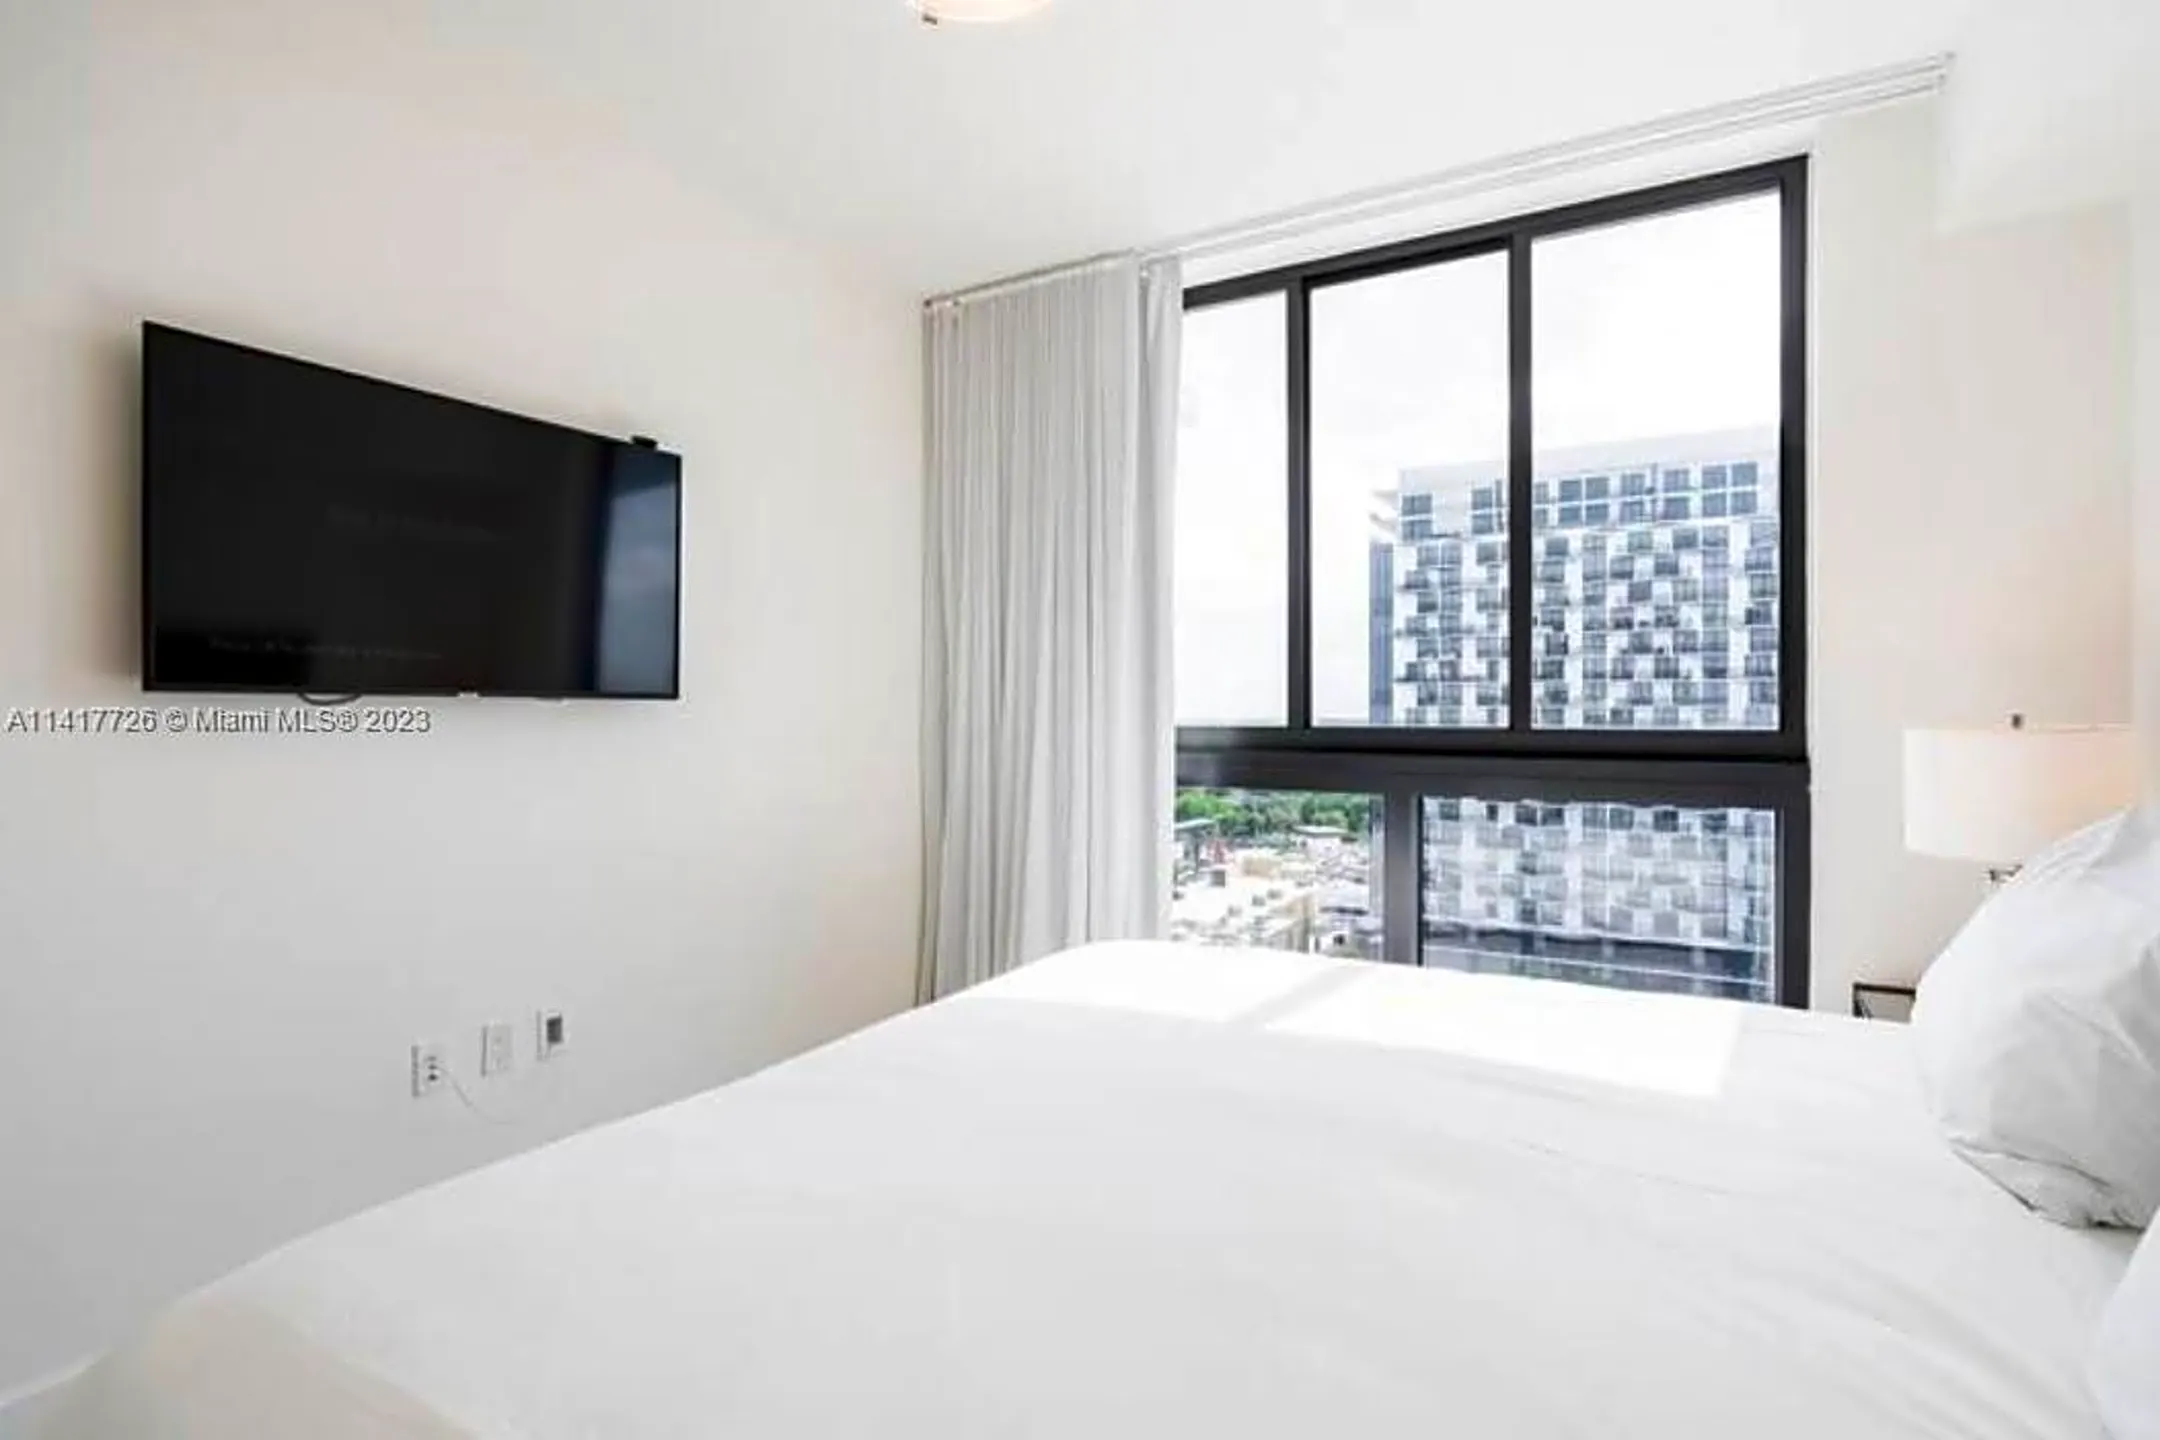 Bedroom - 5350 NW 84th Ave #1208 - Doral, FL